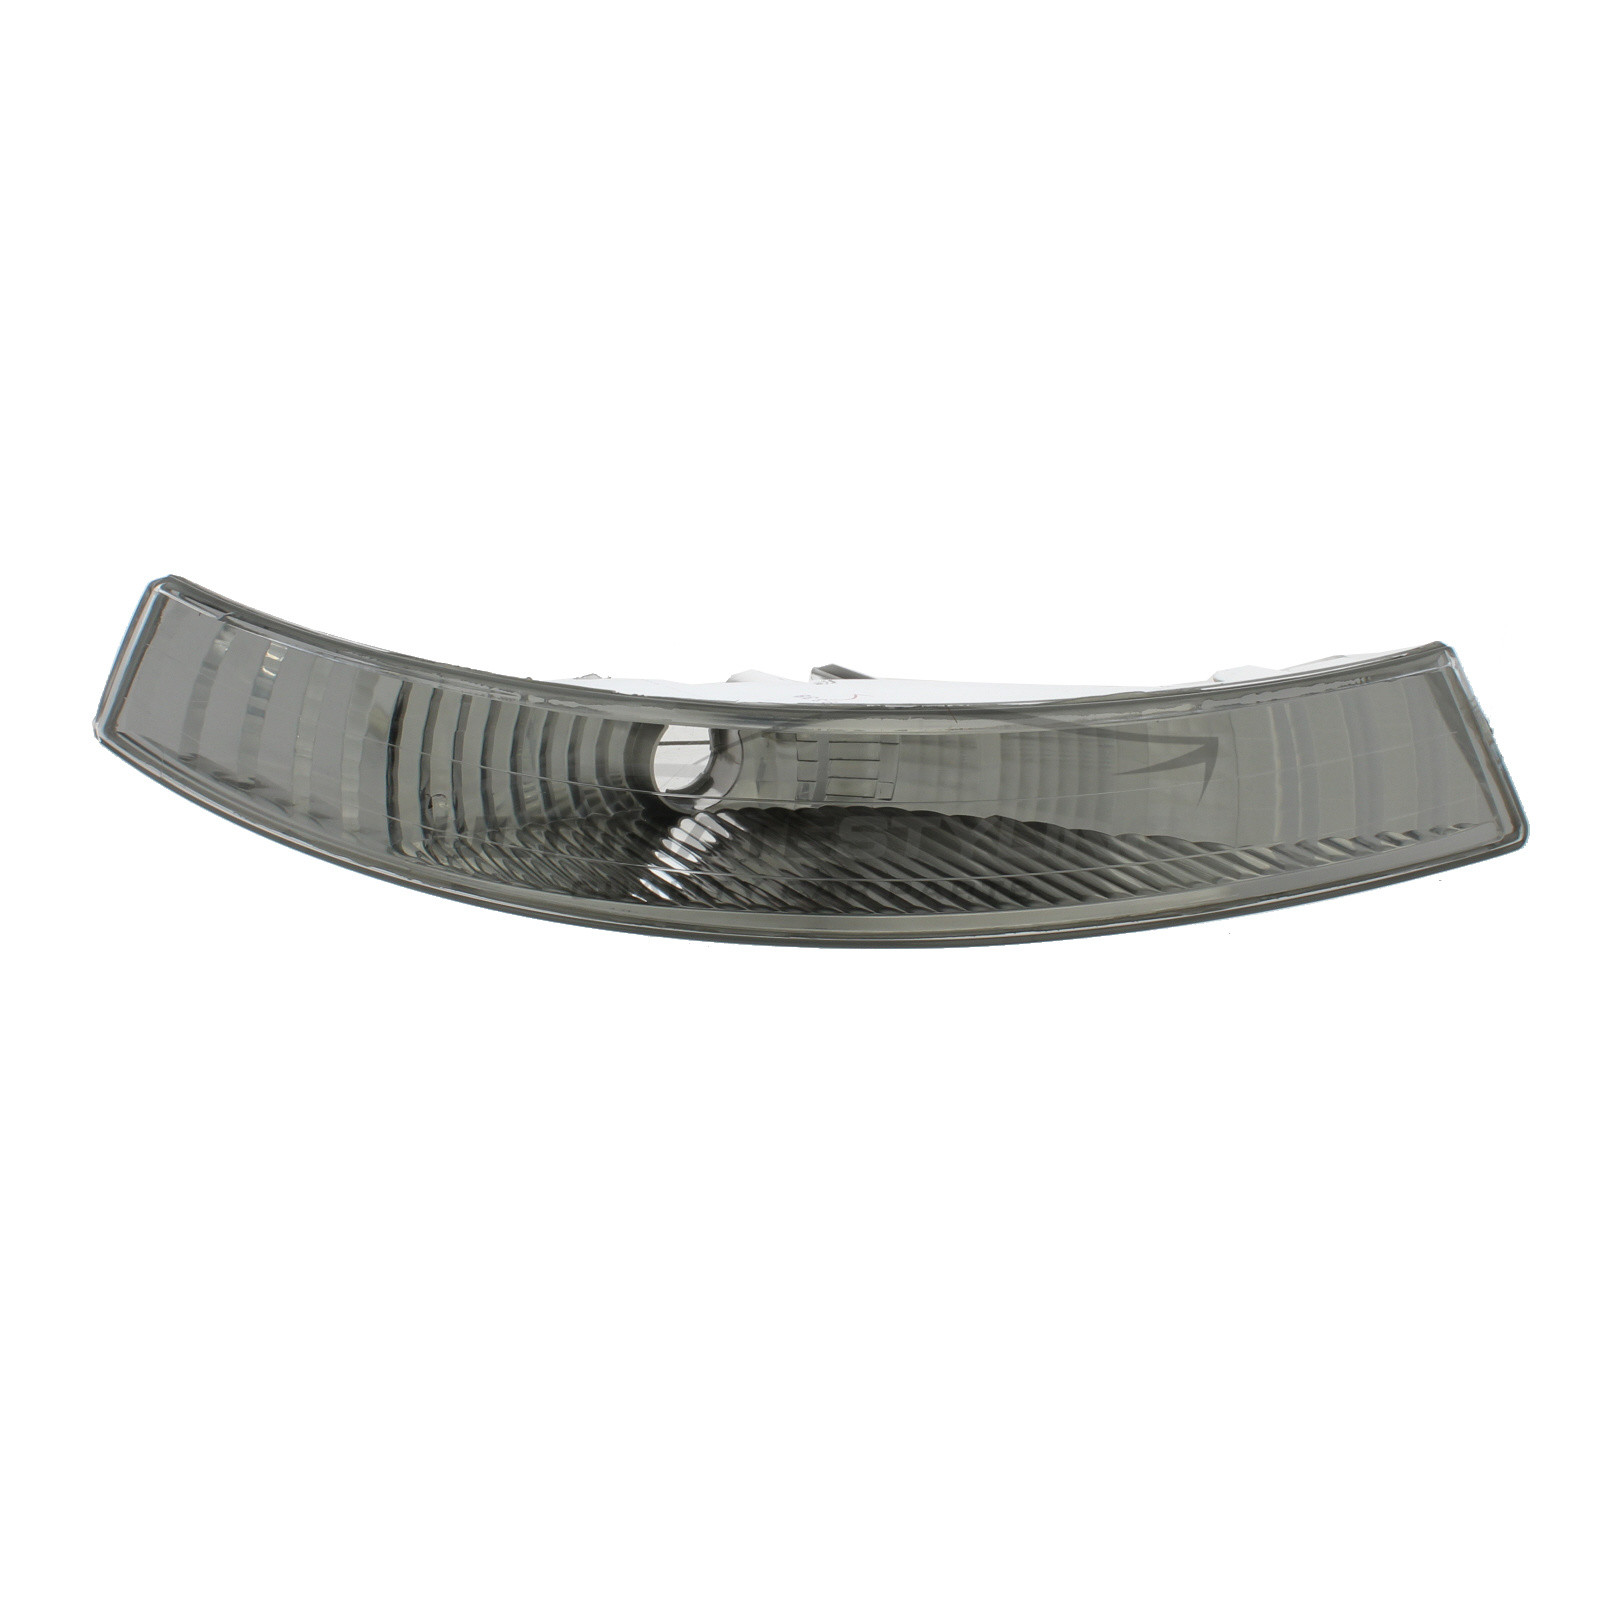 Nissan Primastar 2002-2006 / Renault Trafic 2001-2006 Clear Front Indicator Excludes Bulb Holder - Drivers Side (RH)